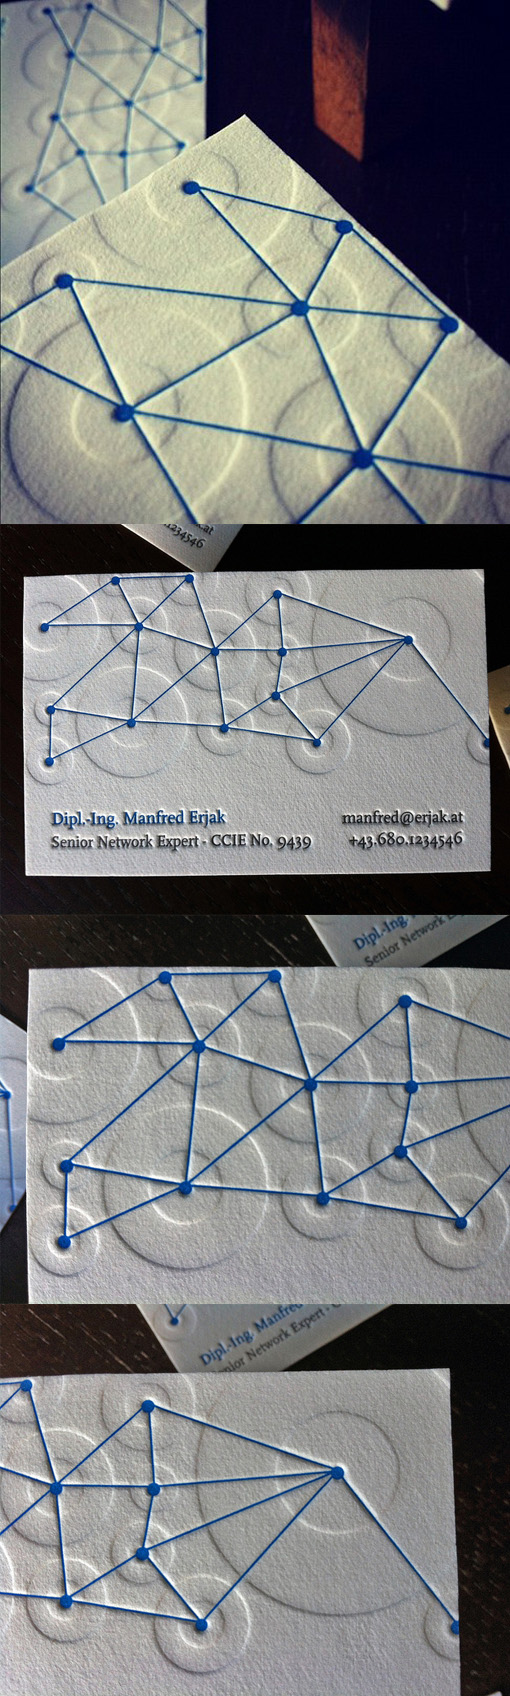 Clever Use Of Print And Texture On A Business Card For A Network Engineer